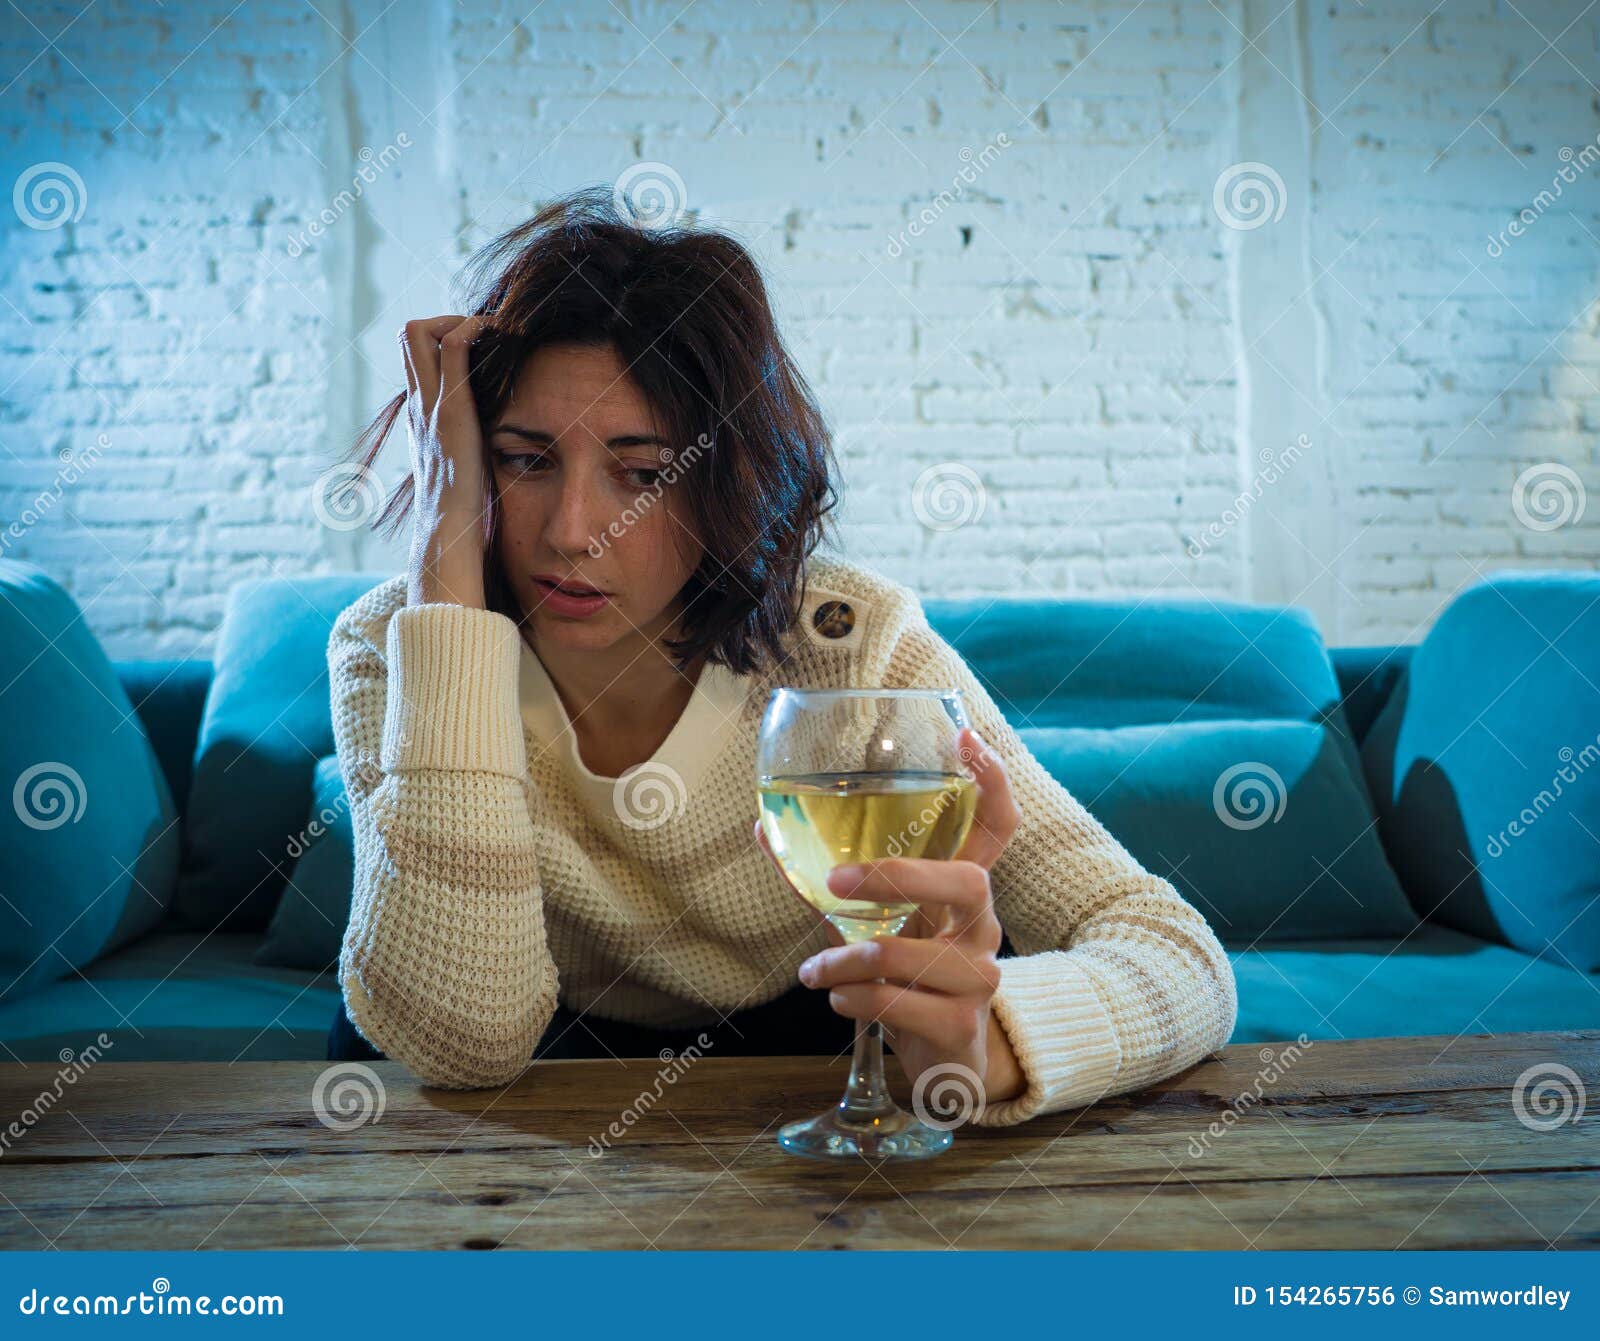 Sad, Unhappy, Helpless Woman Drinking Wine Alone At Home ...